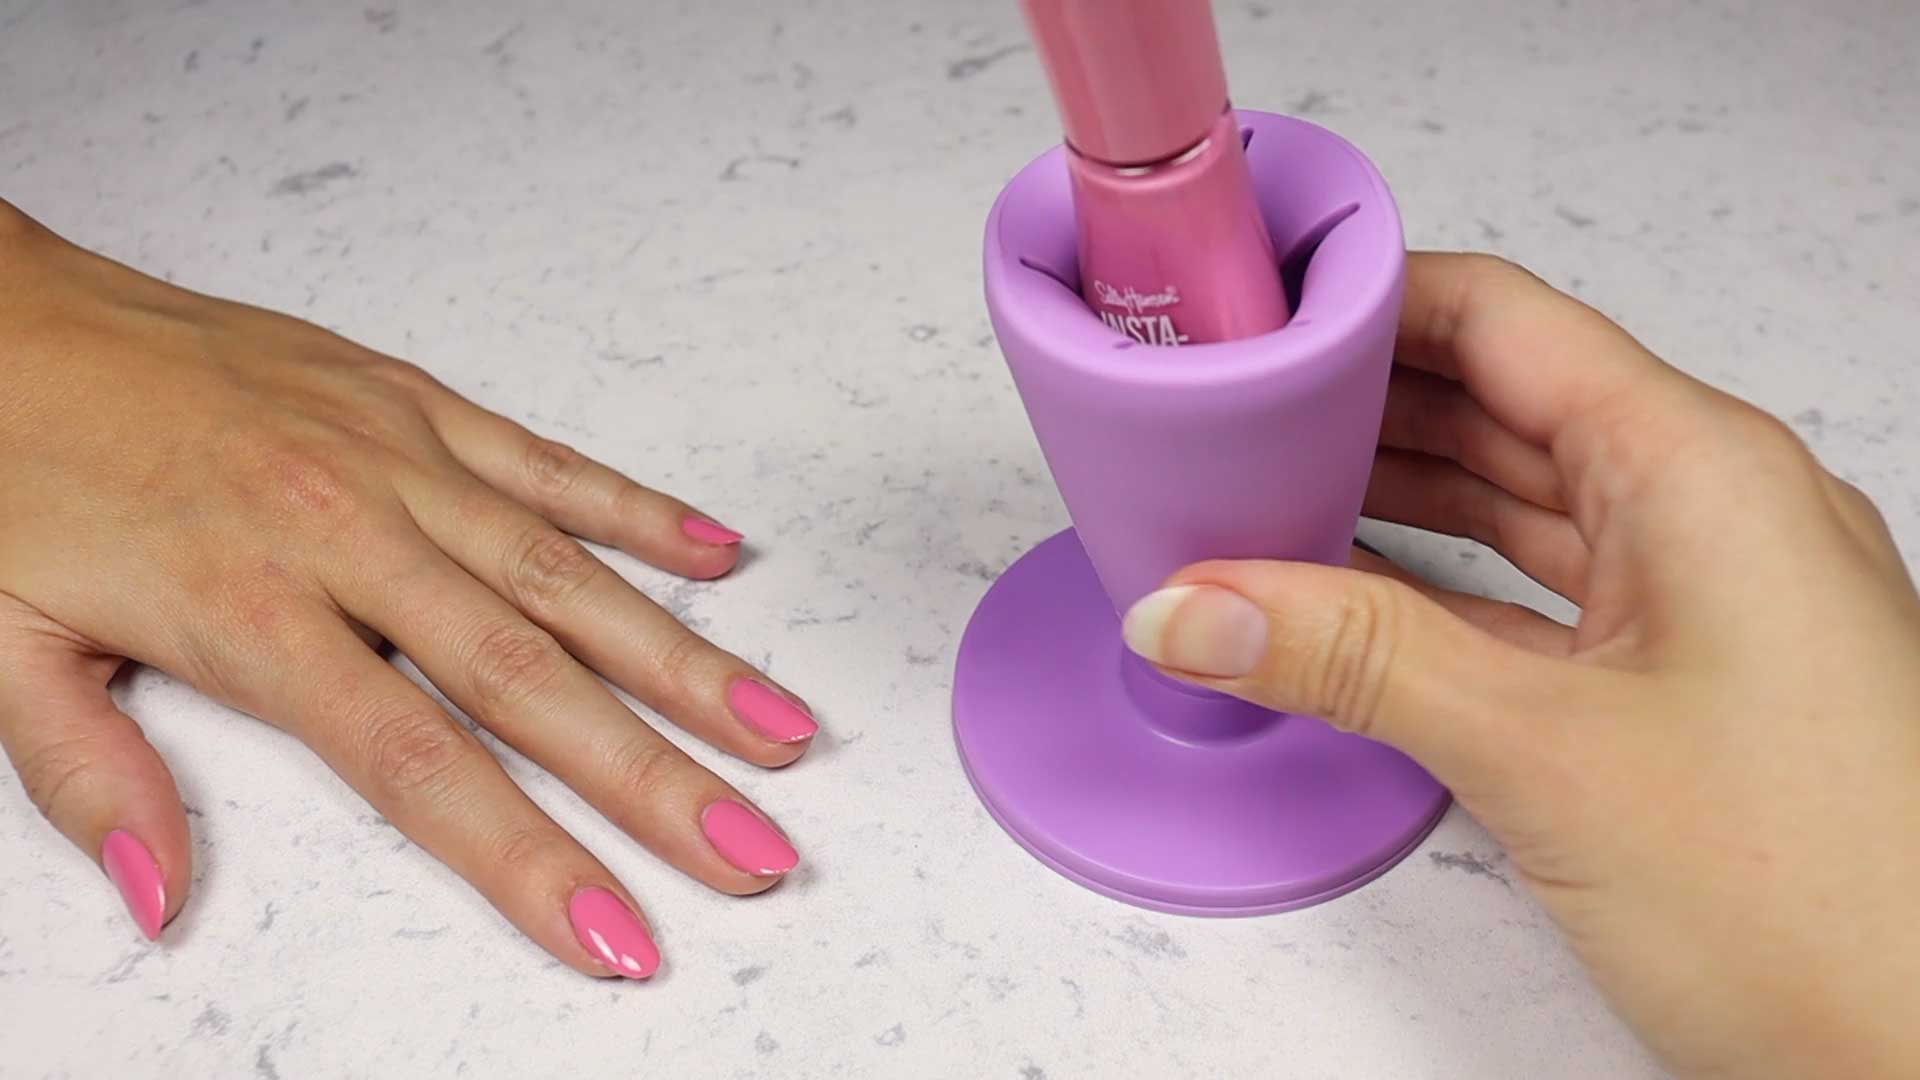 Demonstration of the Tweexy Hinge Untippable Nail Polish Bottle Holder with Smartgrip Airlock Technology